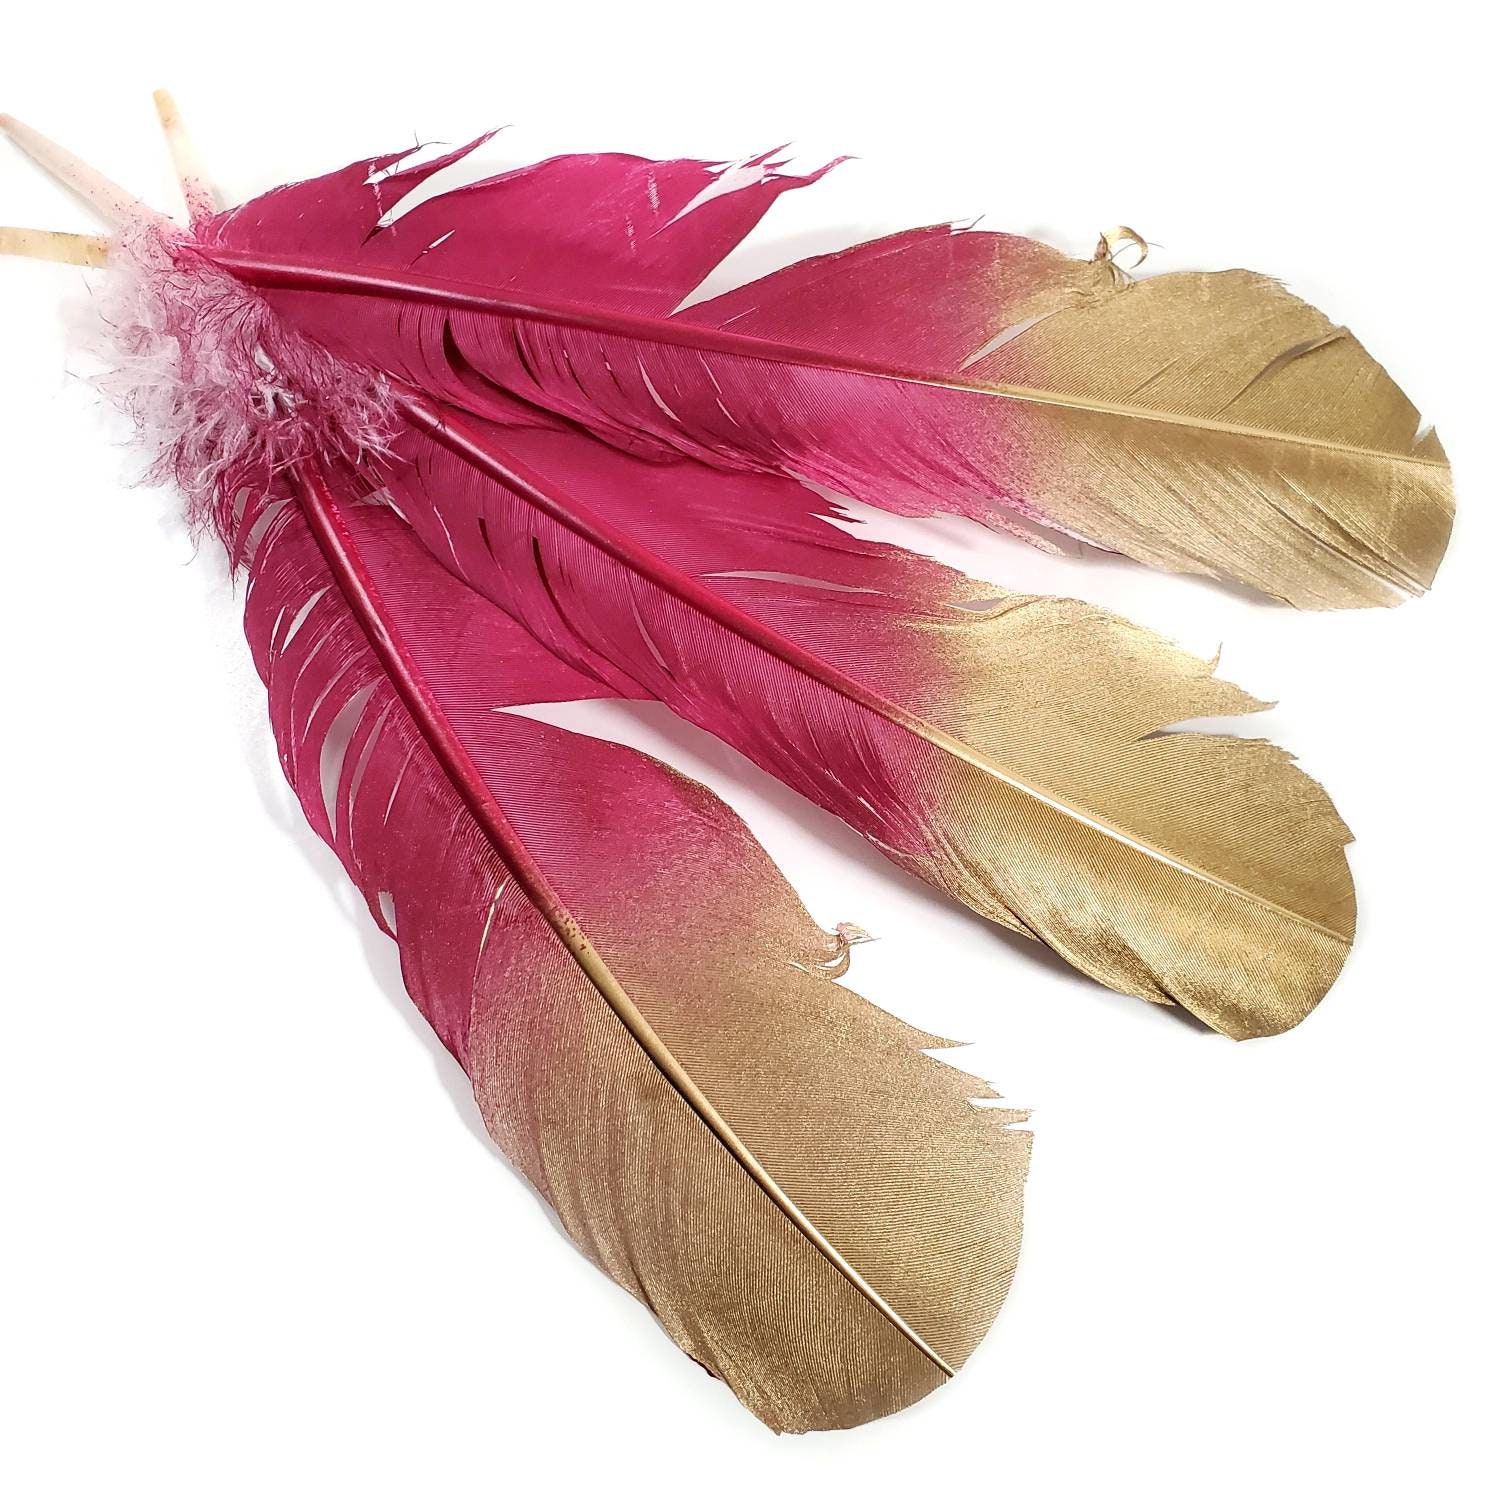 Wild Feathers, 50 Pieces Natural Barred Wild Turkey Merriam Primary Wing  Pointer Quill Wholesale Feathers bulk : 3441 